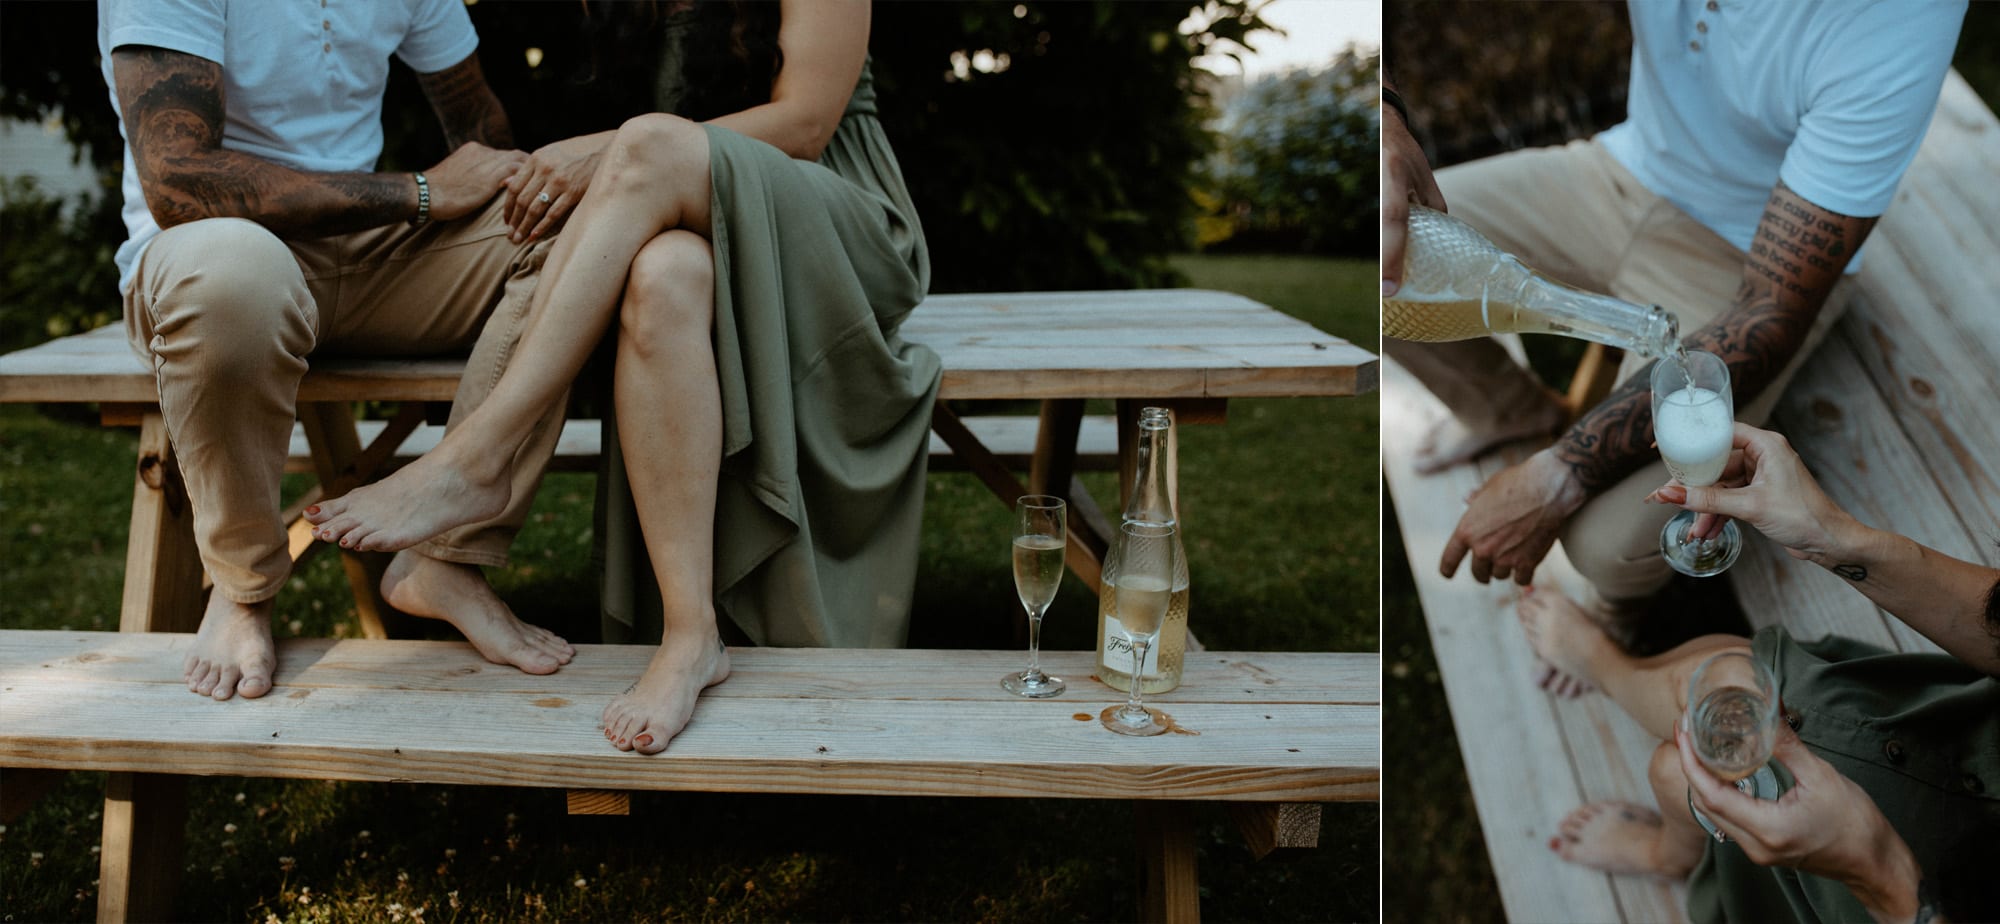 couple drinking wine at a picnic table engagement photoshoot backyard